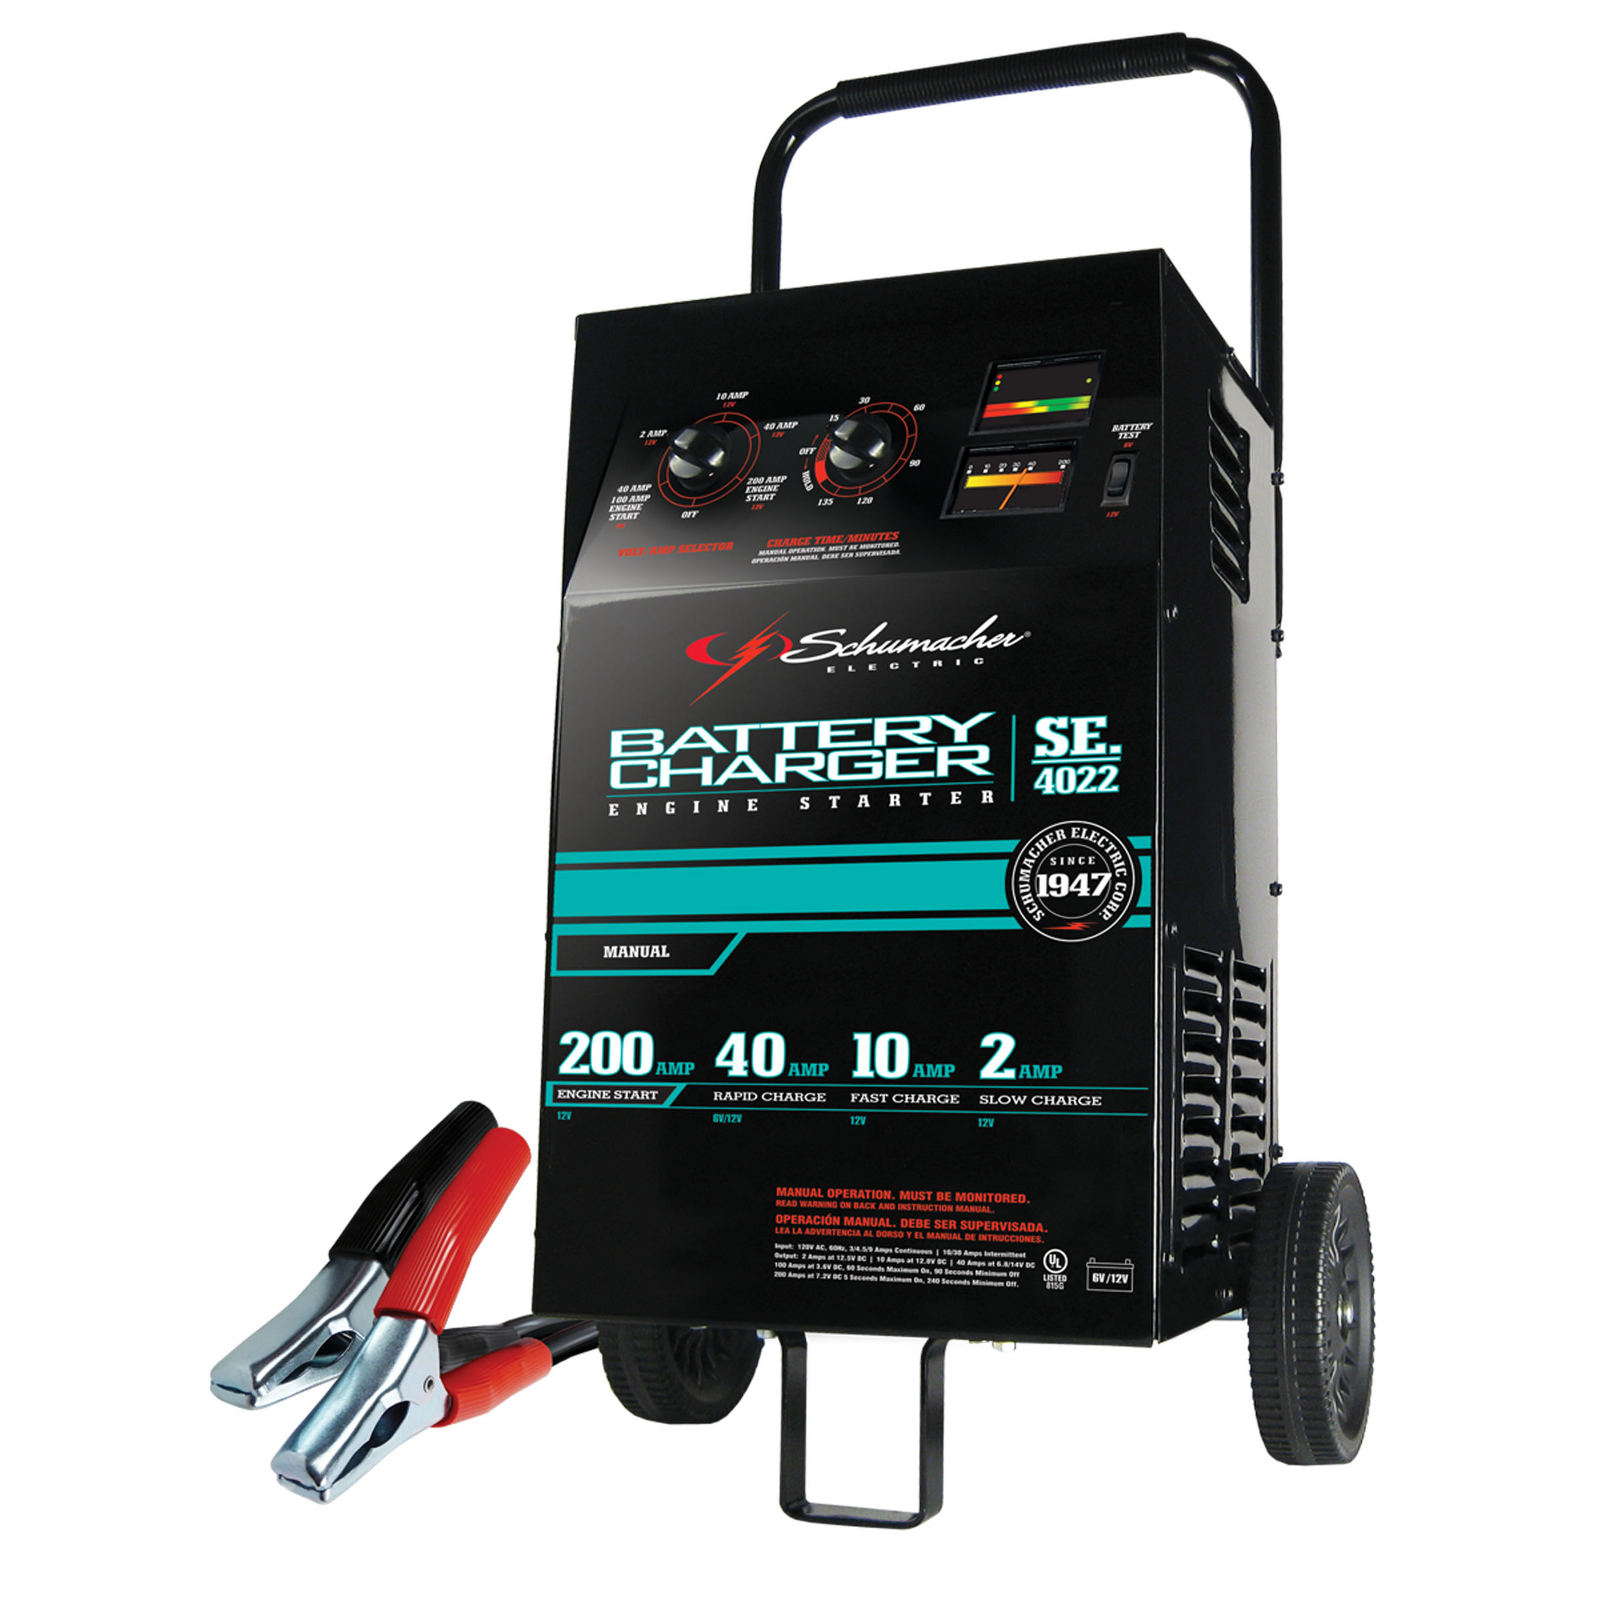 200-Amp 6/12V Manual Wheeled Battery Charger/Starter with Tester